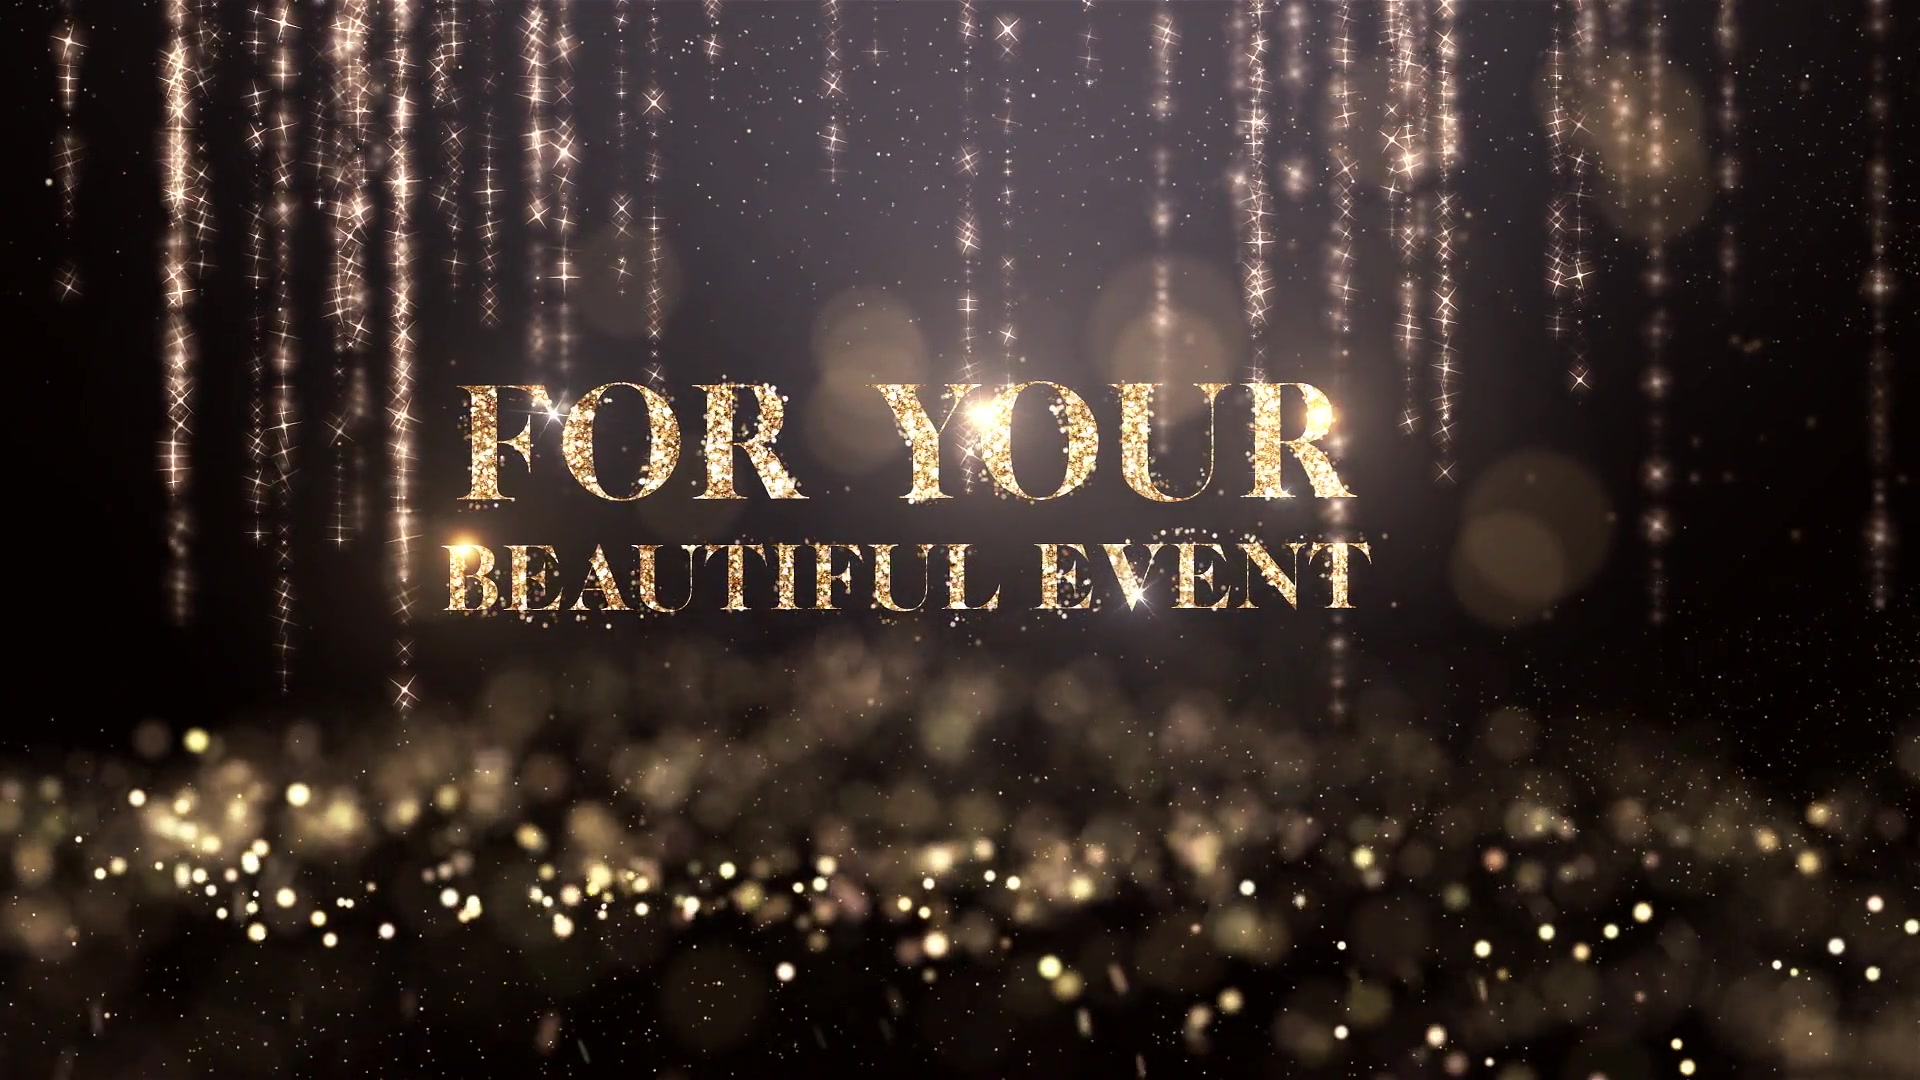 Glitter Titles - Download Videohive 22190742